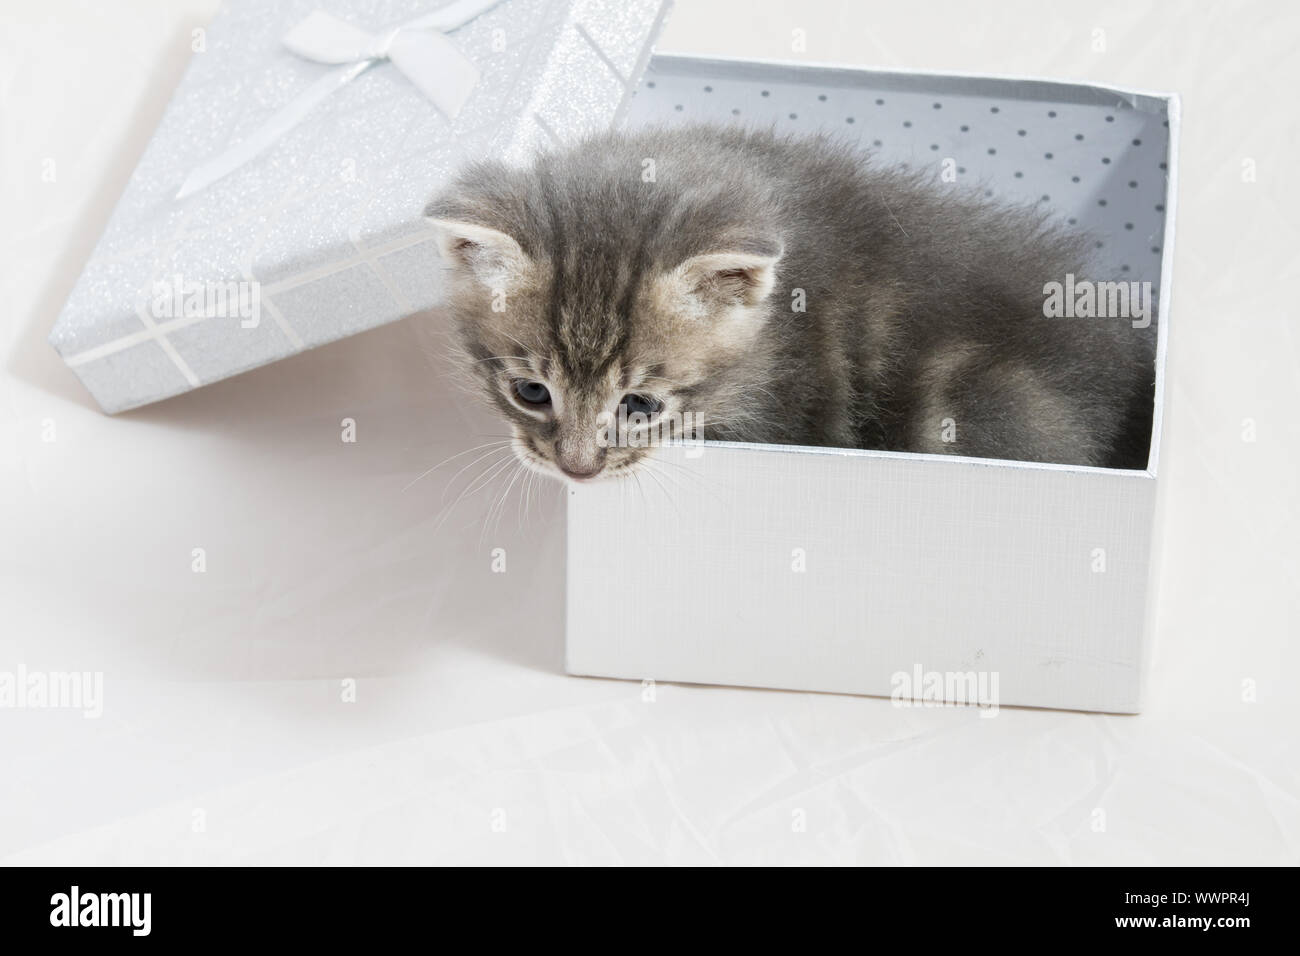 surprise, small kitten stuck in a gift box, cuddly animal sweet face Stock Photo